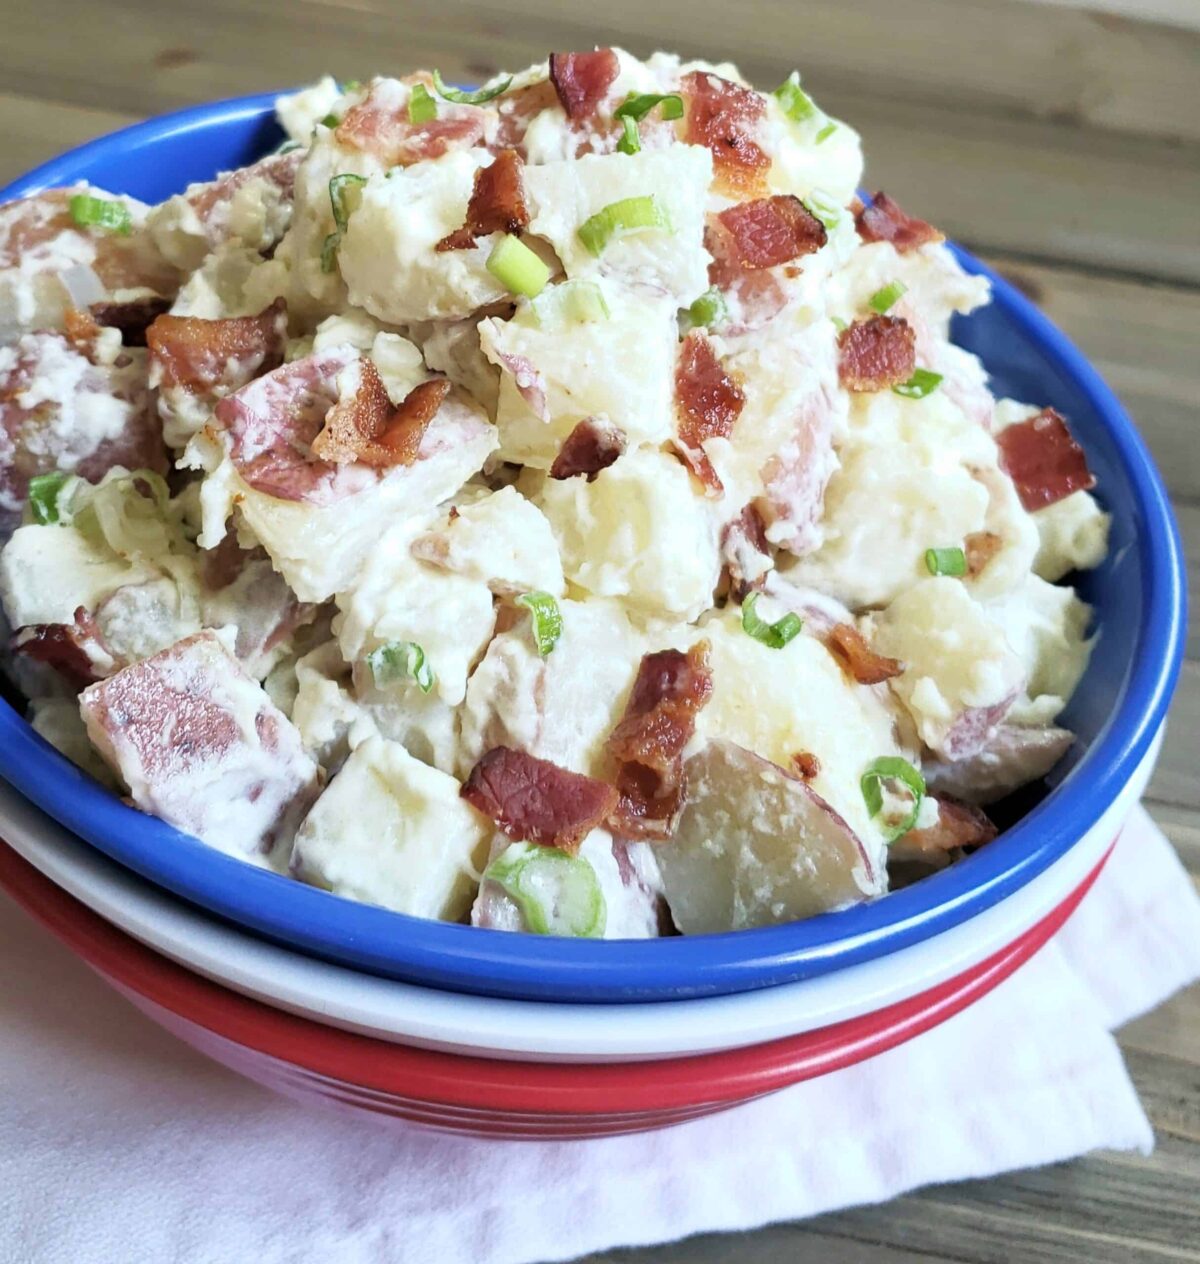 Sour Cream and Green Onion Potato Salad in a stack of 3 red, white and blue bowls on white cloth